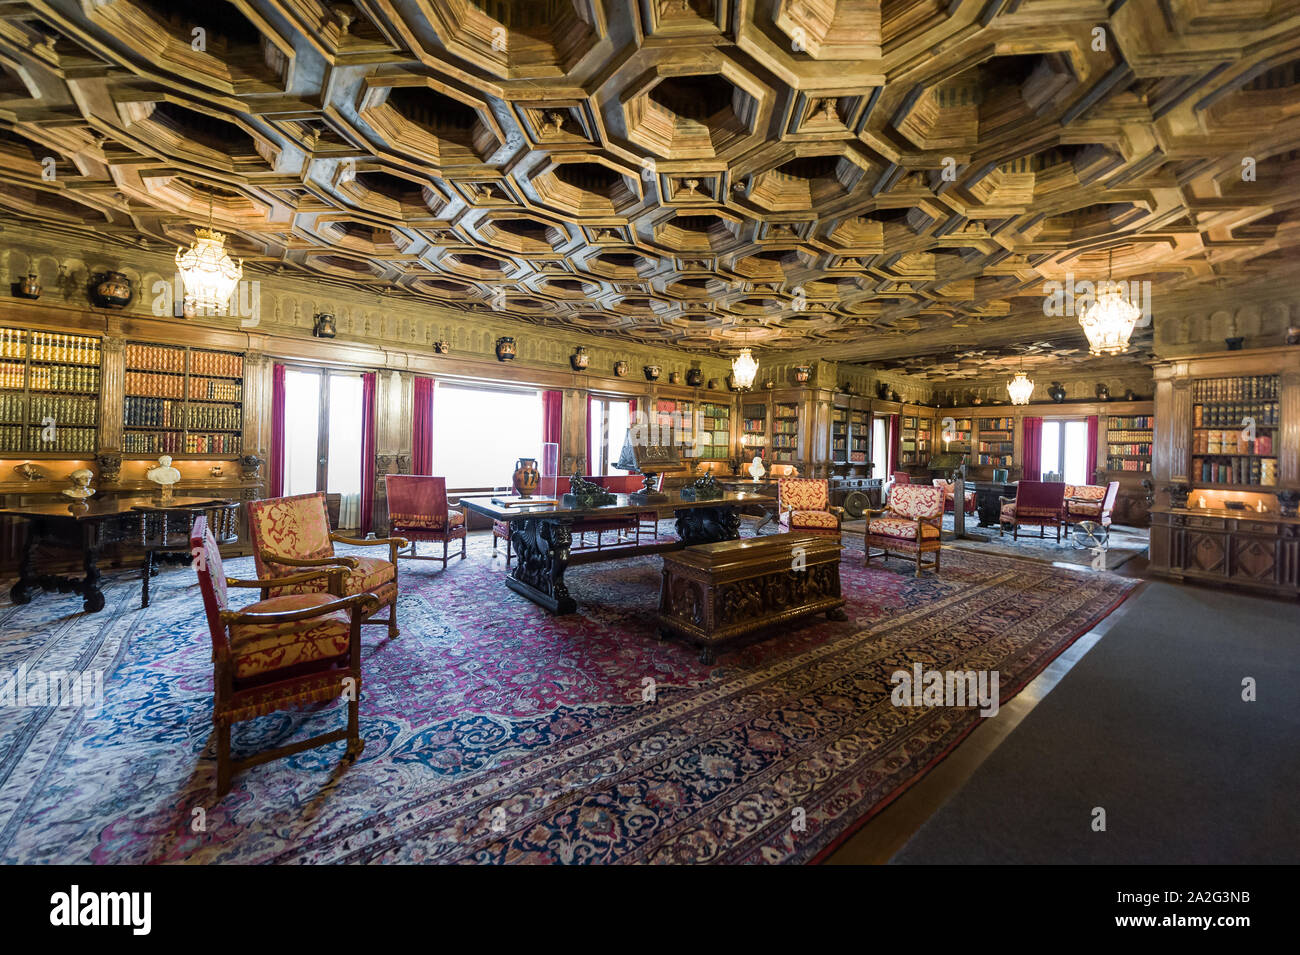 California, USA, 09 Jun 2013: Grand study room with attached library at Hearst Castle, which is a National and California Historical Landmark opened f Stock Photo